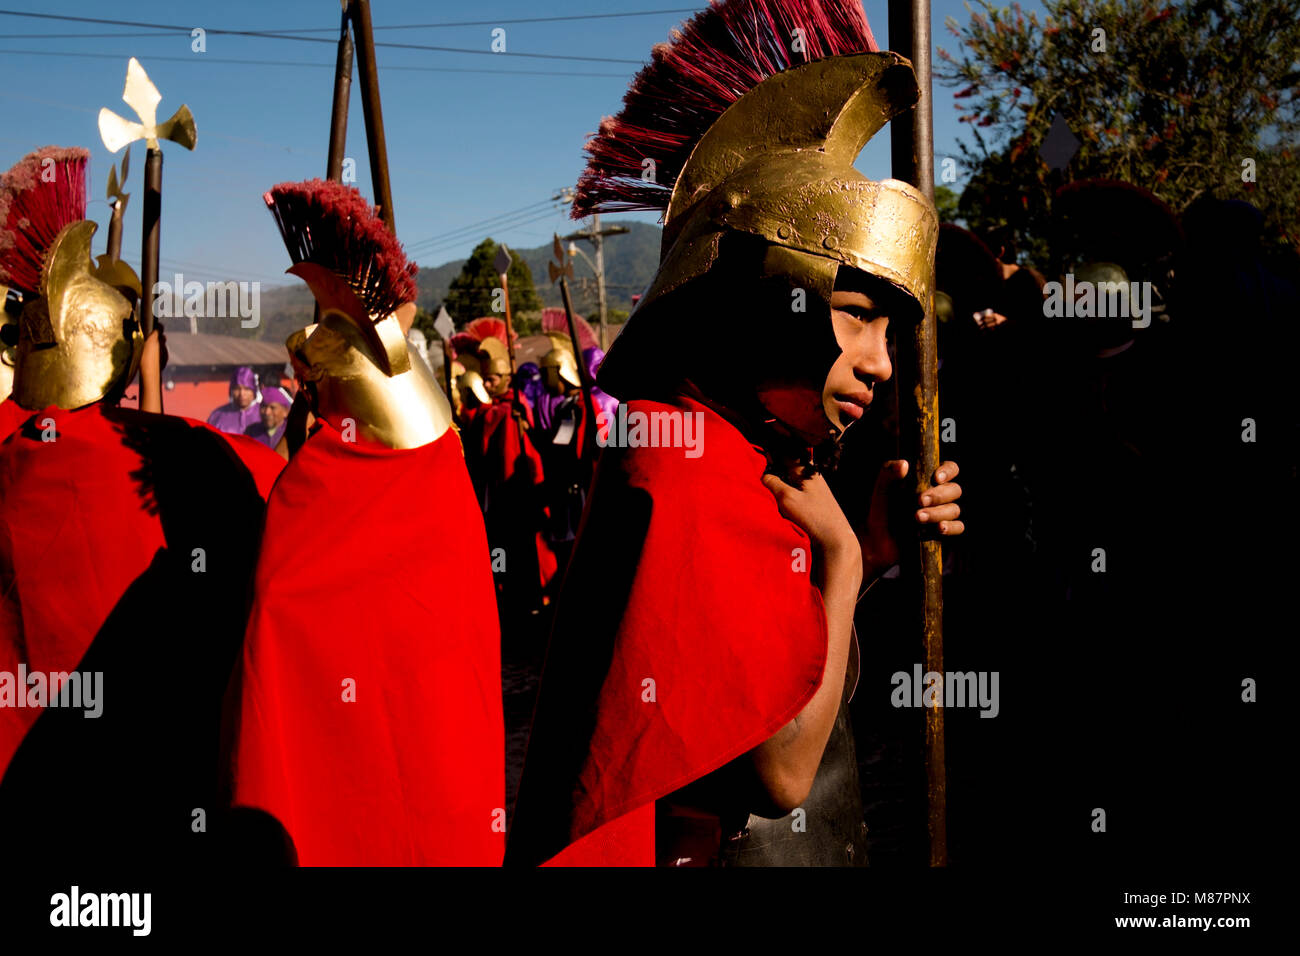 Guatemala, Antigua - February 17, 2013. Young boys in Roman uniforms prepare for the Holy Week celebrations in Antigua. (Photo credit: Gonzales Photo - Flemming Bo Jensen). Stock Photo